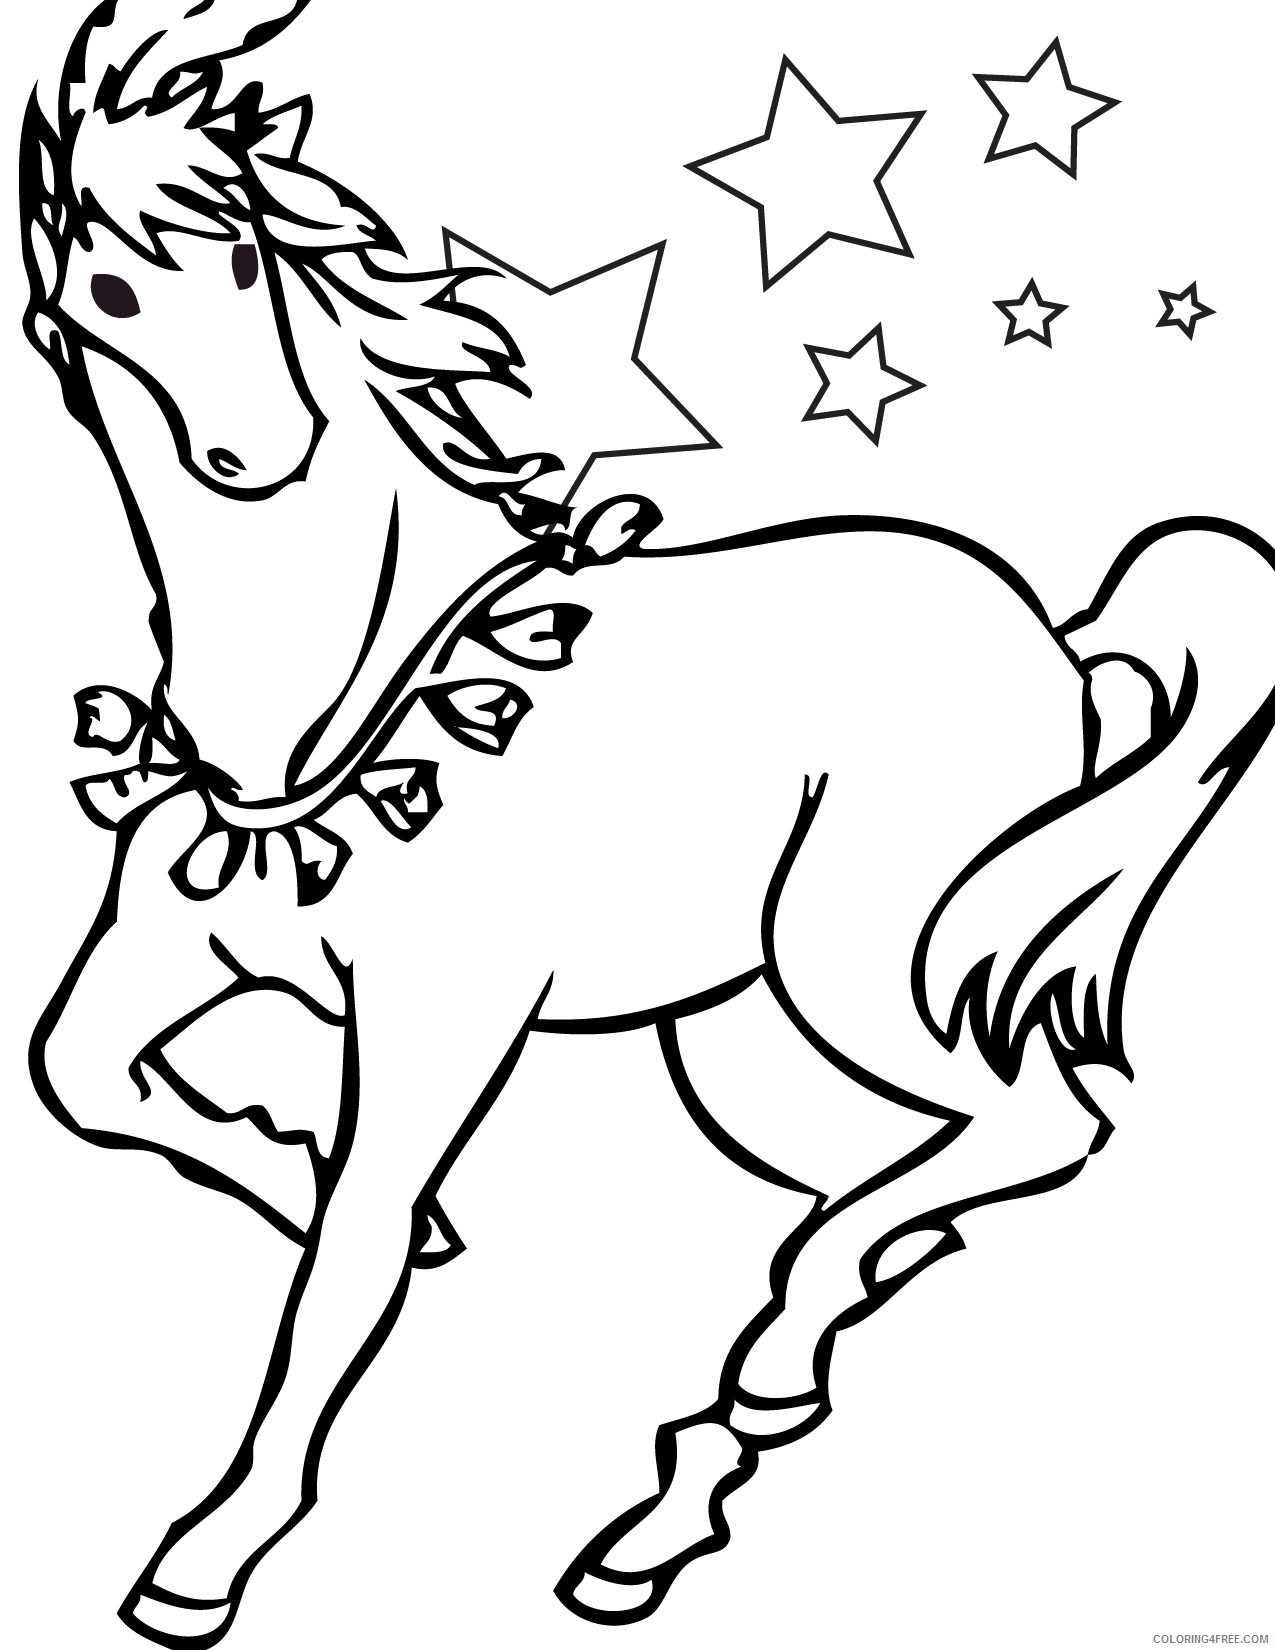 horse coloring pages with stars Coloring4free